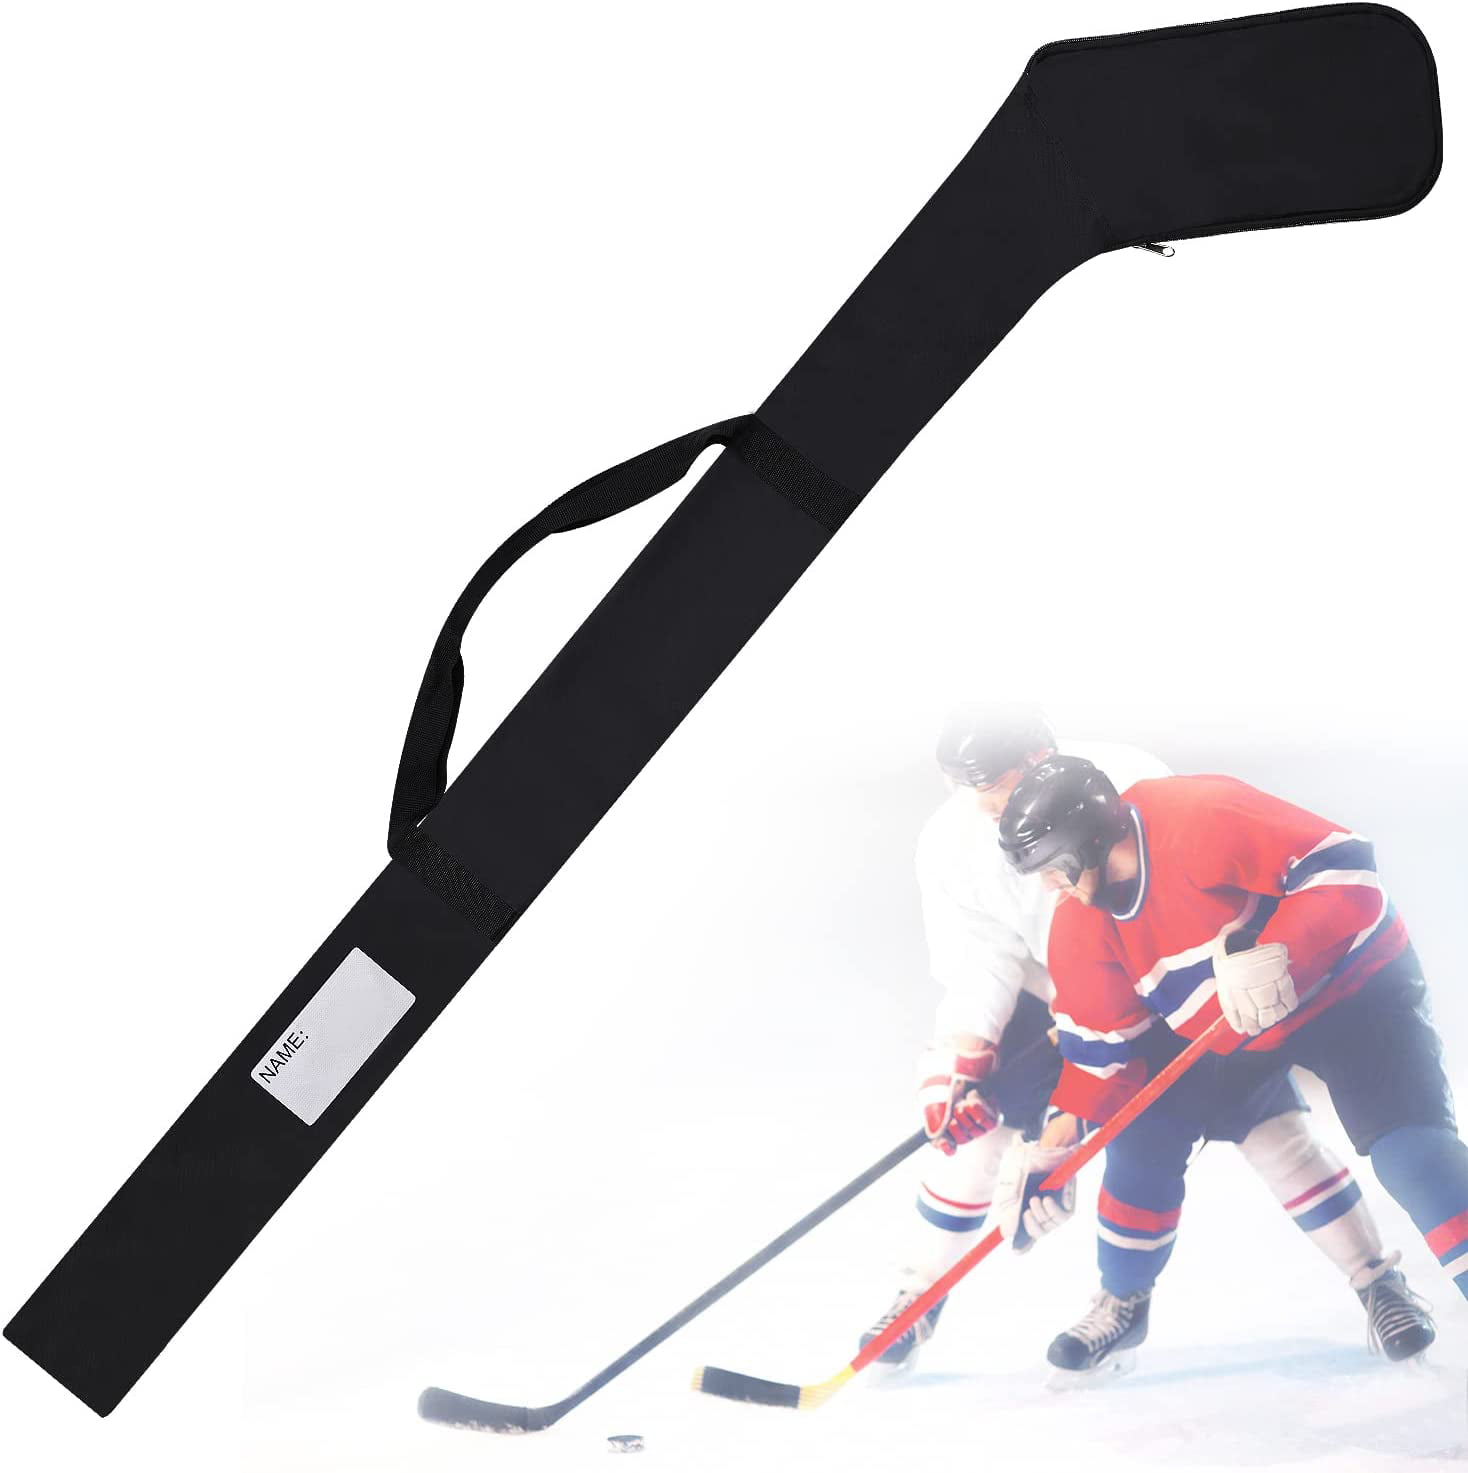 Hockey Stick Bag, Field Hockey Stick Bag, Two Shoulder Strip Hockey Equipment Bag for Men Women and Adults Use, Hockey Stick Accessories for and Outdoor - Walmart.com